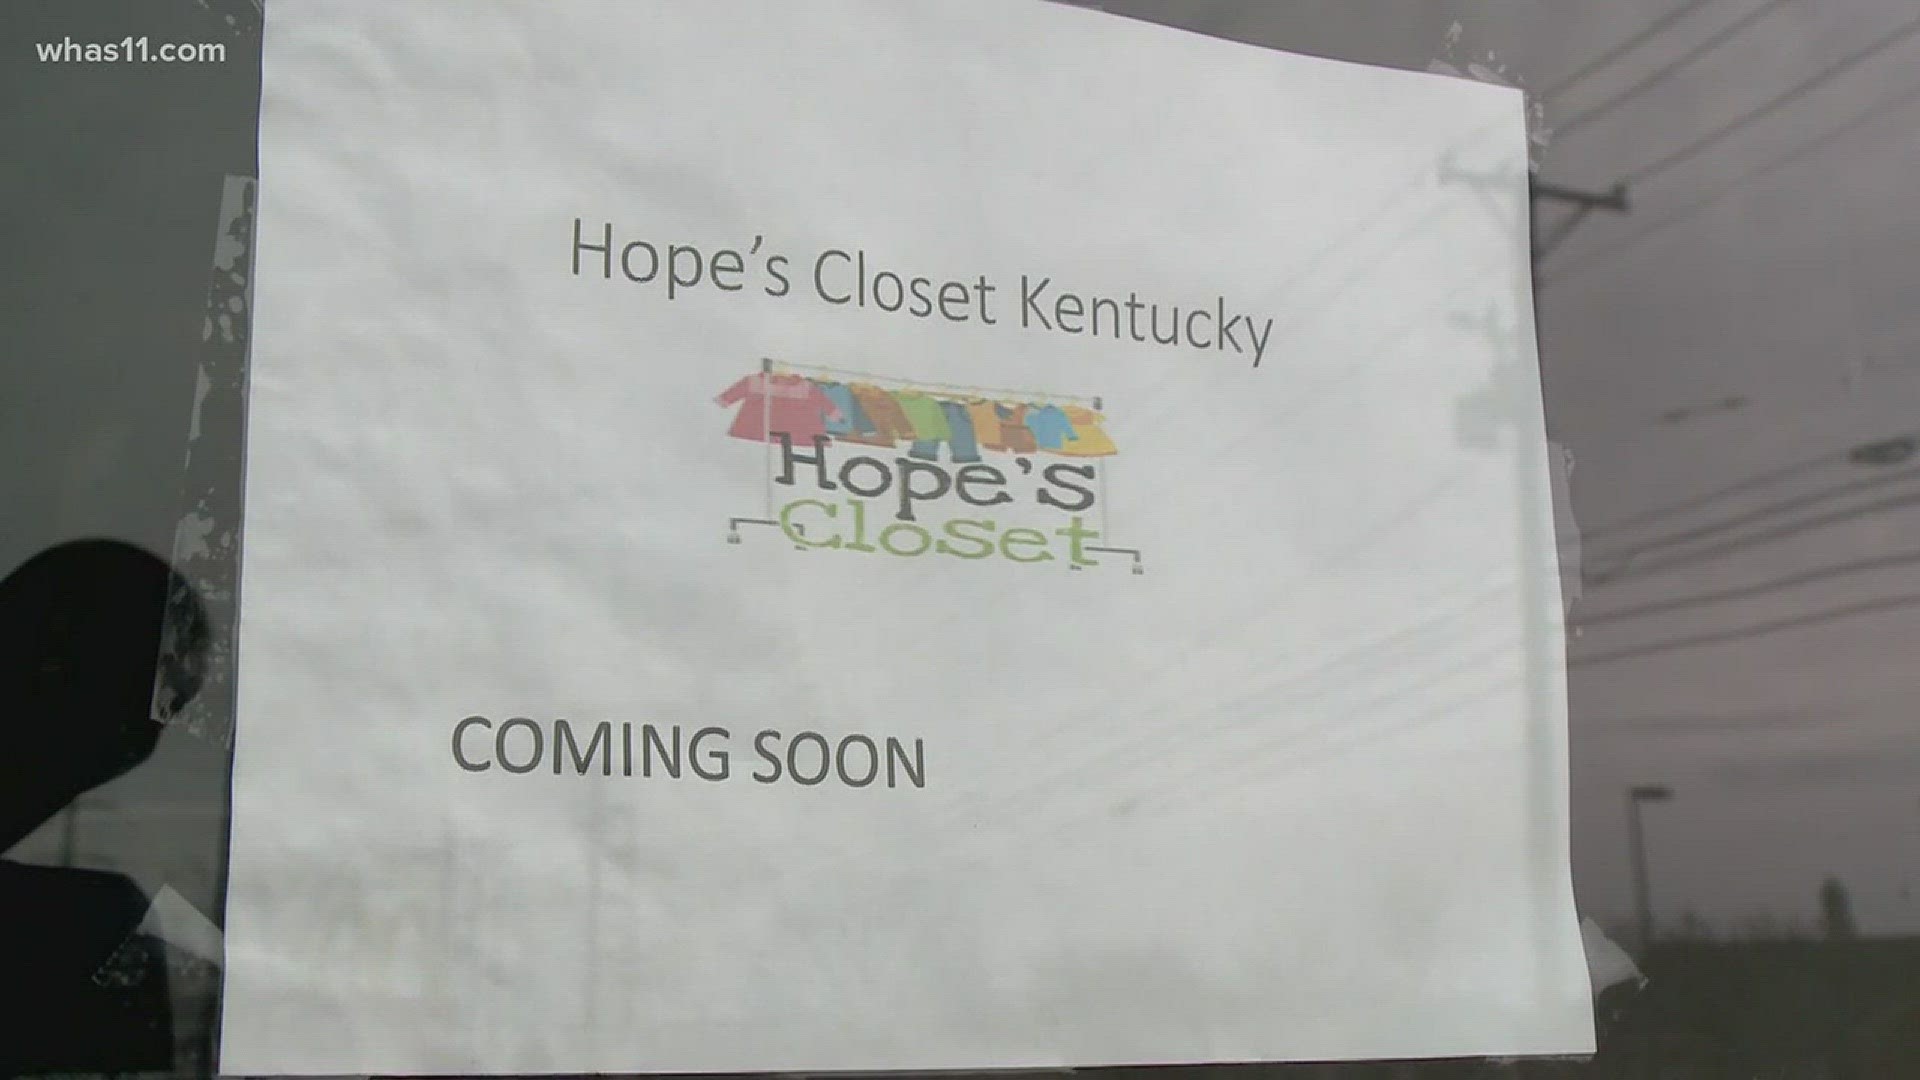 After three years of opening up her garage to Kentucky foster families, Angela Bischoff is ready to relocate Hope's Closet to a welcoming storefront off Taylorsville Road.